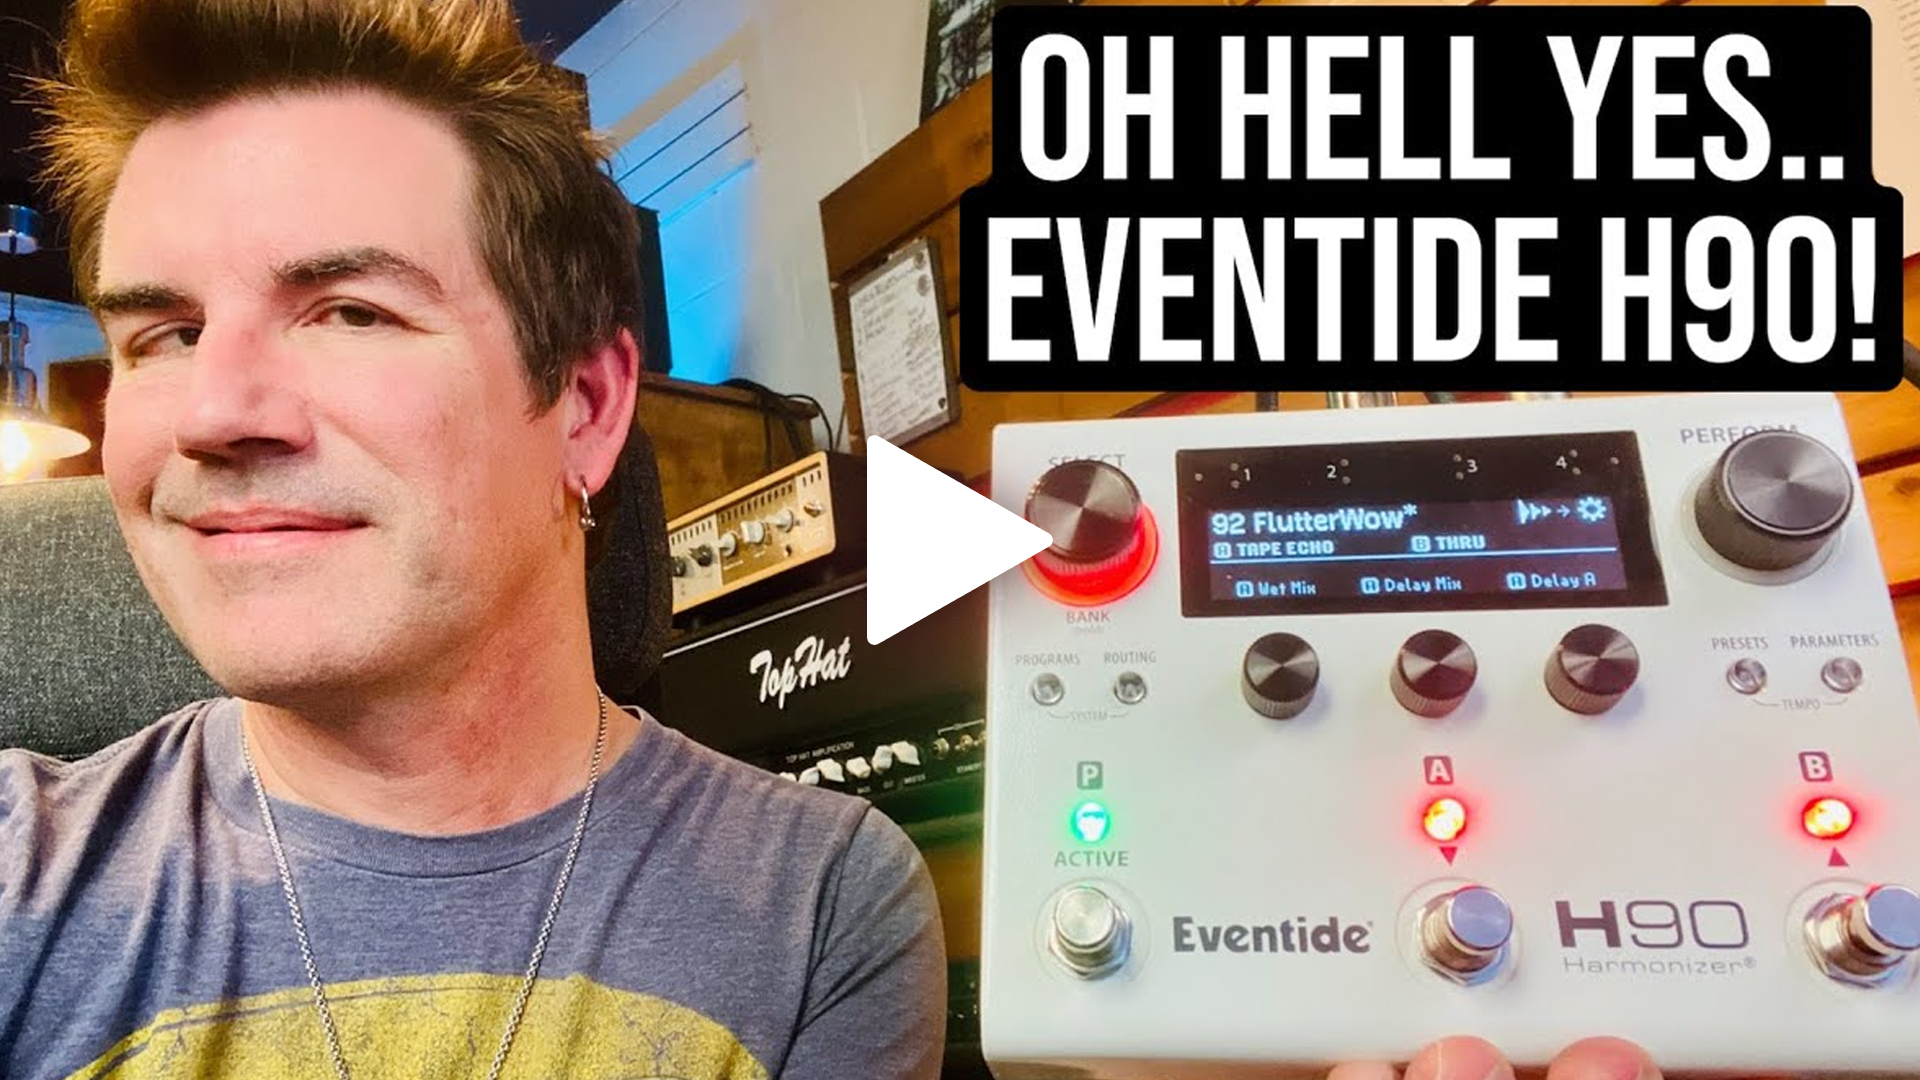 EVENTIDE H90! A MONSTER GUITAR PEDAL...